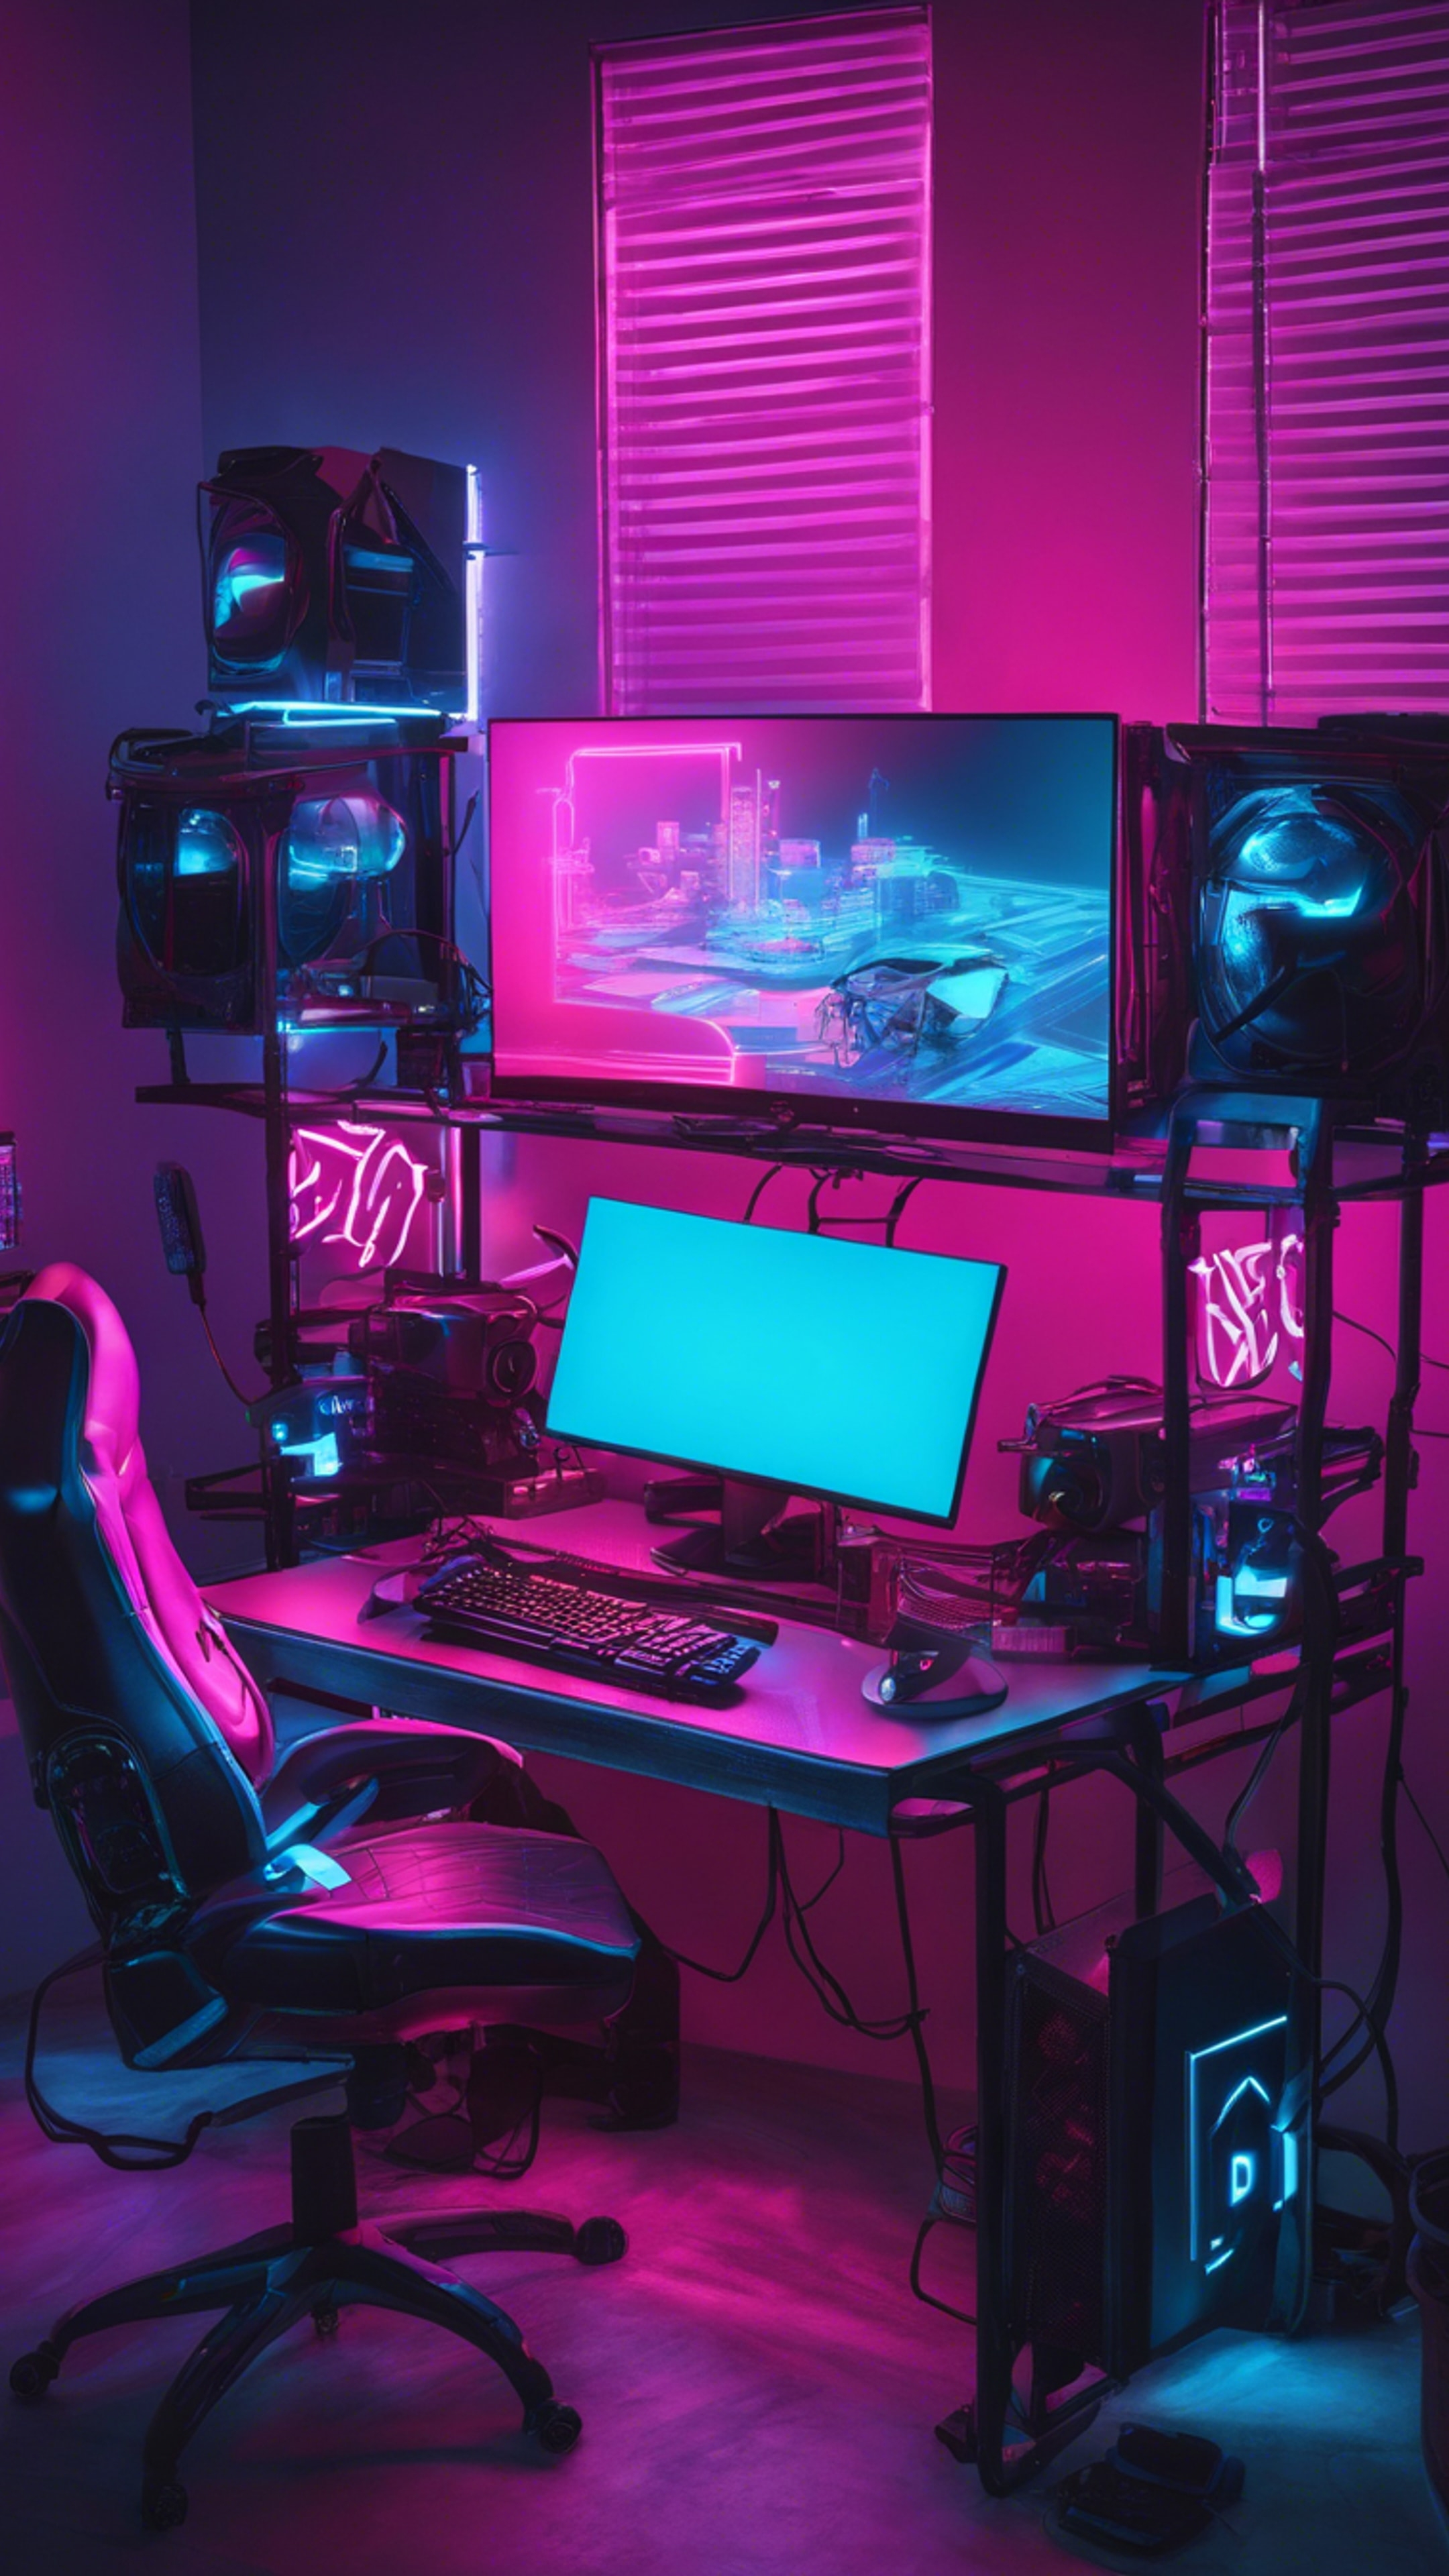 A neon blue gaming setup with a high-end PC, LED keyboard and a gaming monitor. Ფონი[173ea11d79a5456c932c]